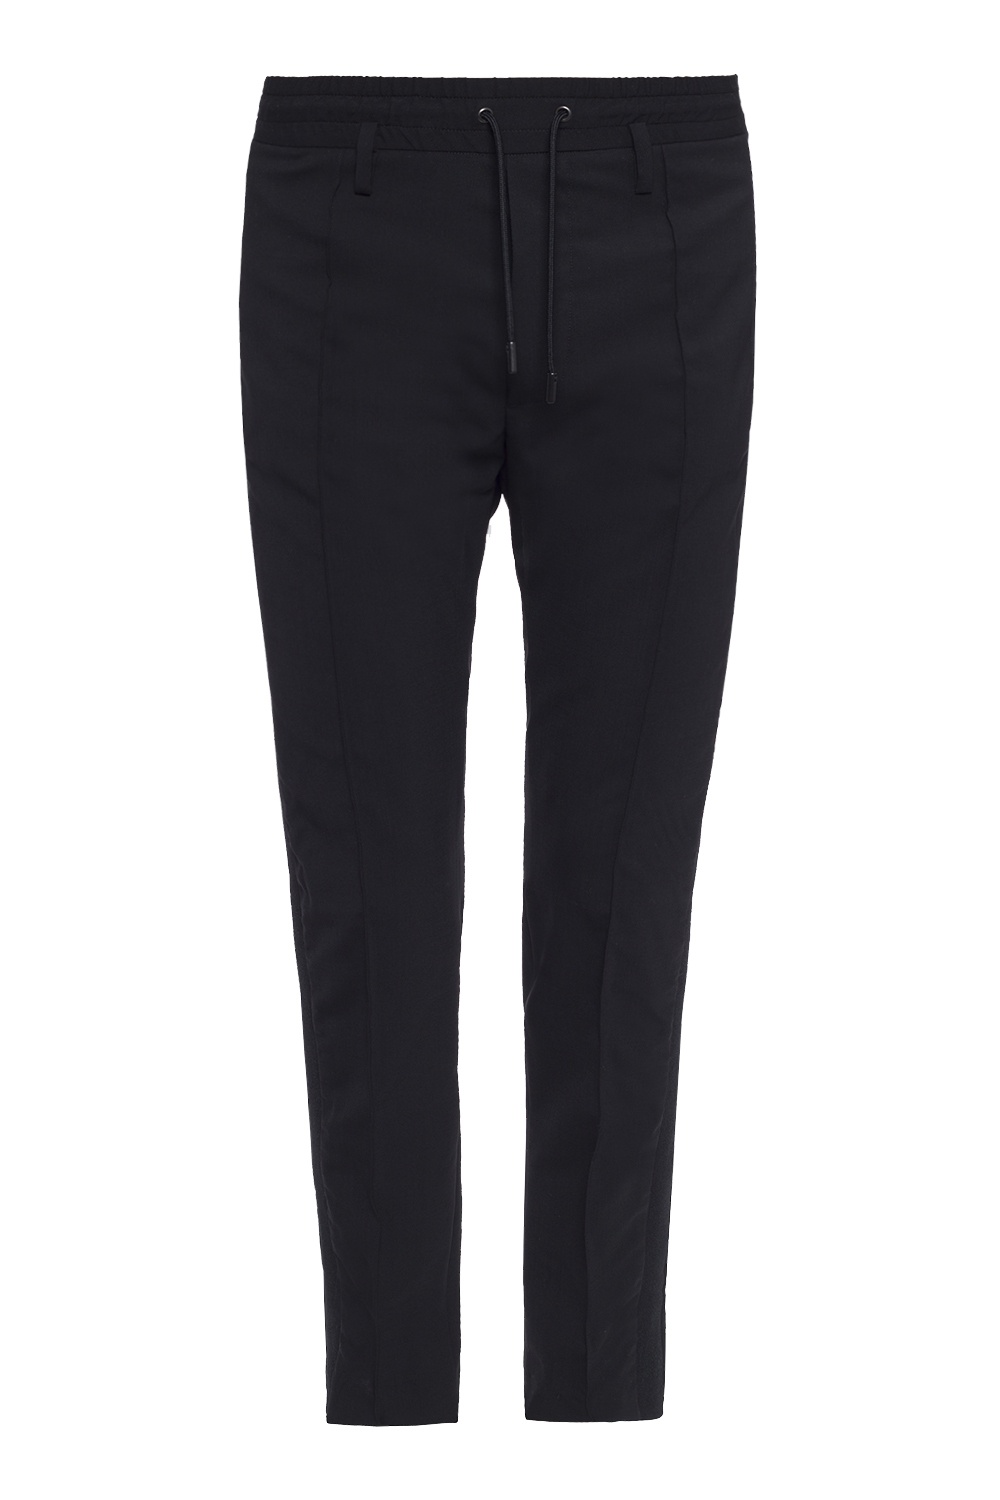 black trousers with gold side stripe